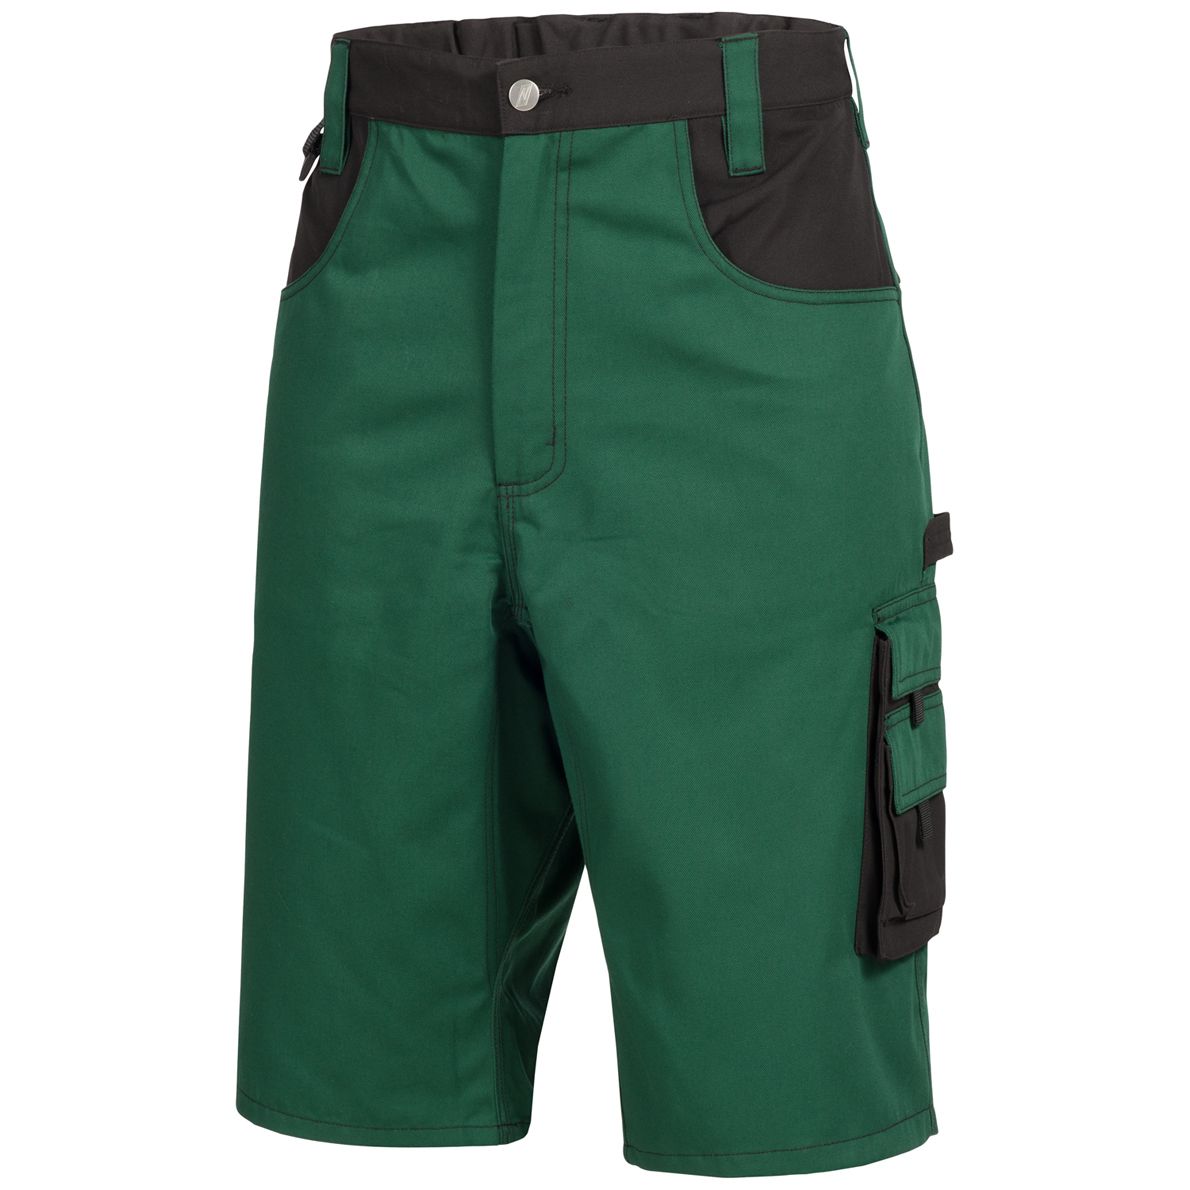 NITRAS MOTION TEX PLUS 7604 Work shorts - Shorts for work - 35% cotton - Green - 46